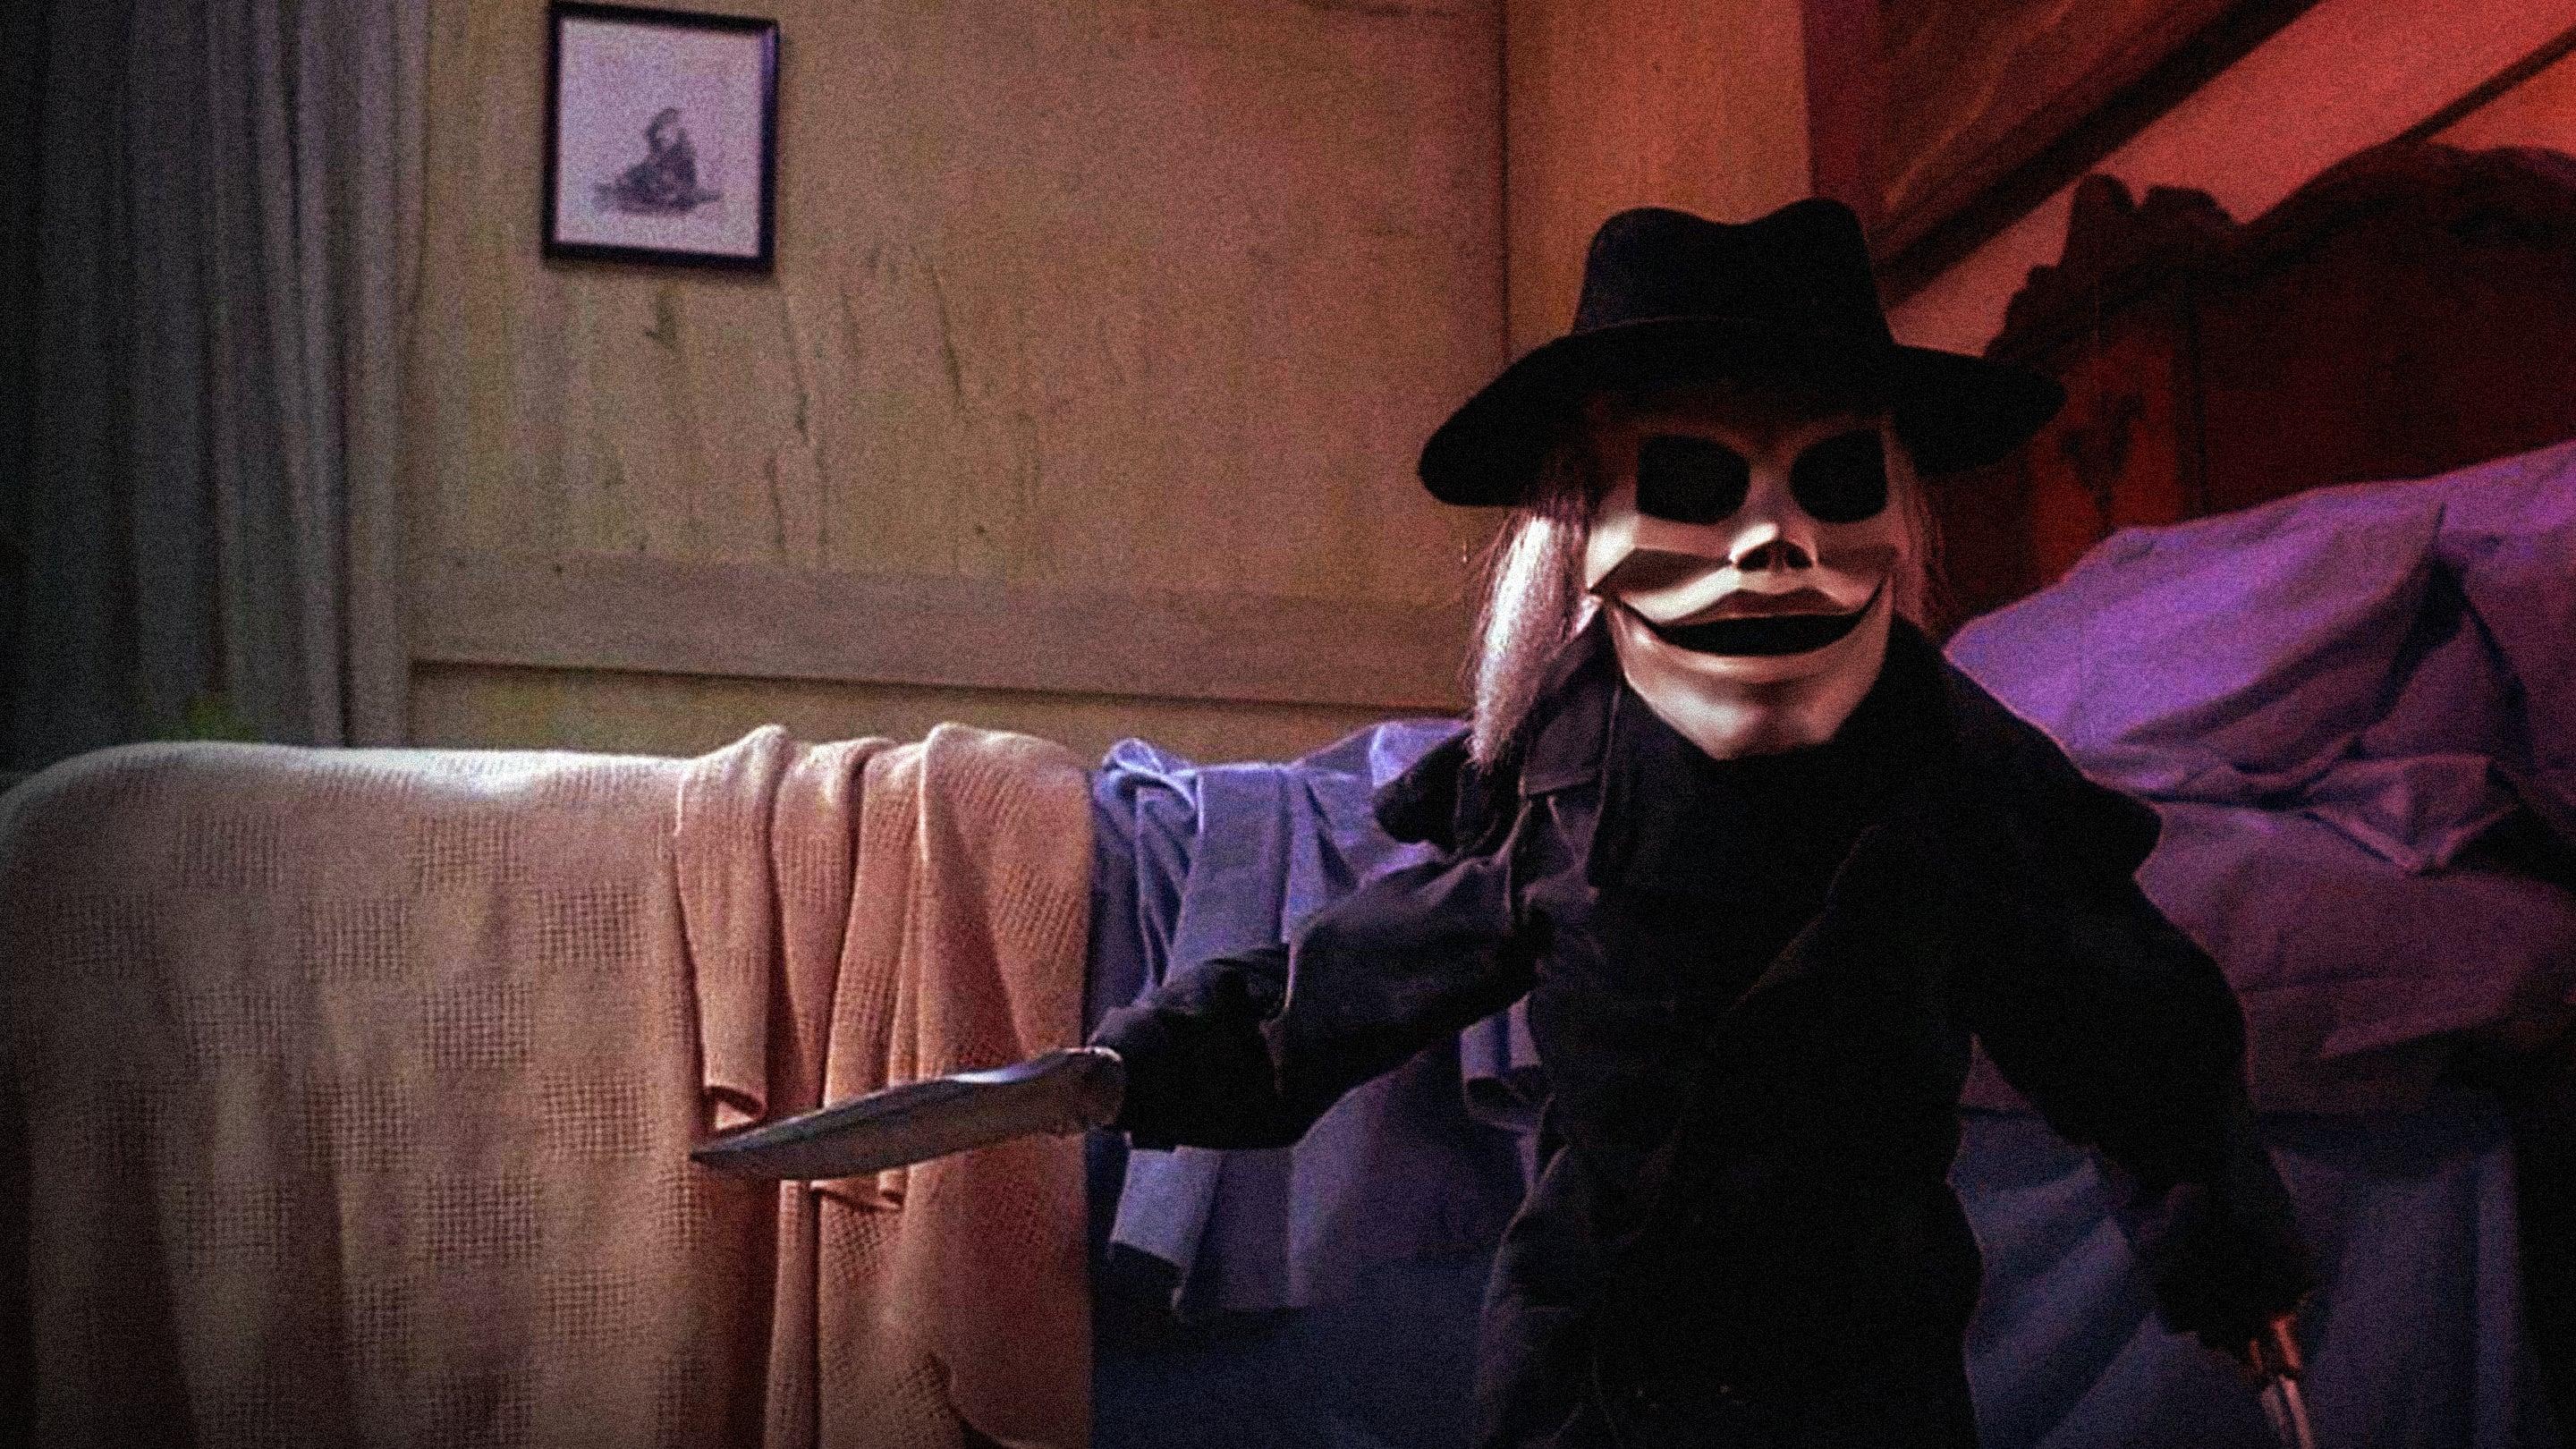 Videozone: The Making of "Puppet Master II" backdrop